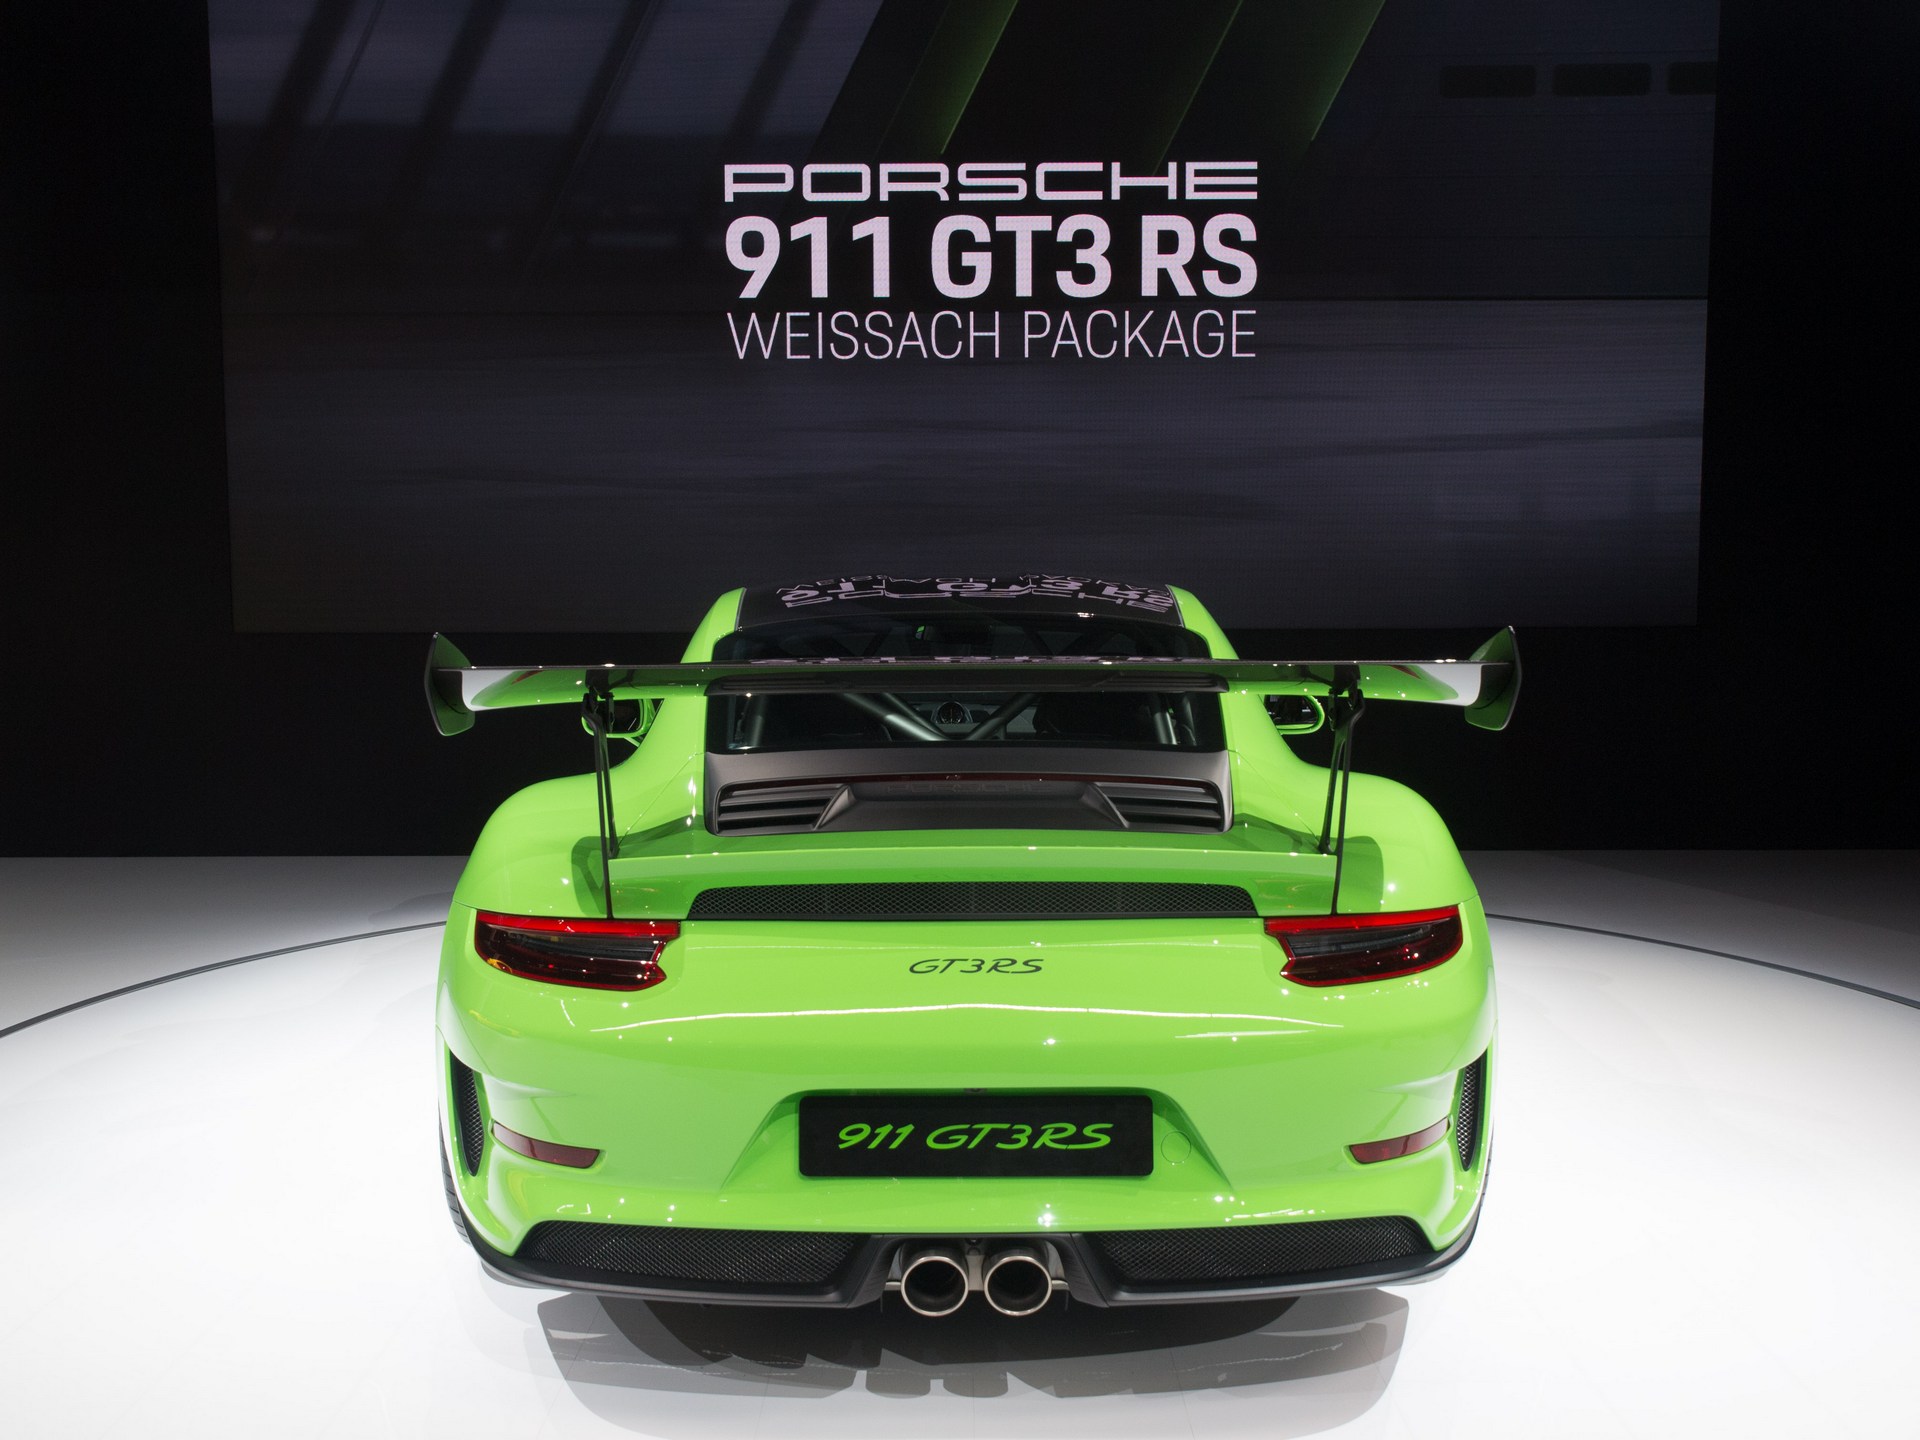 The Options On This 2019 Porsche 911 Gt3 Rs Weissach Package